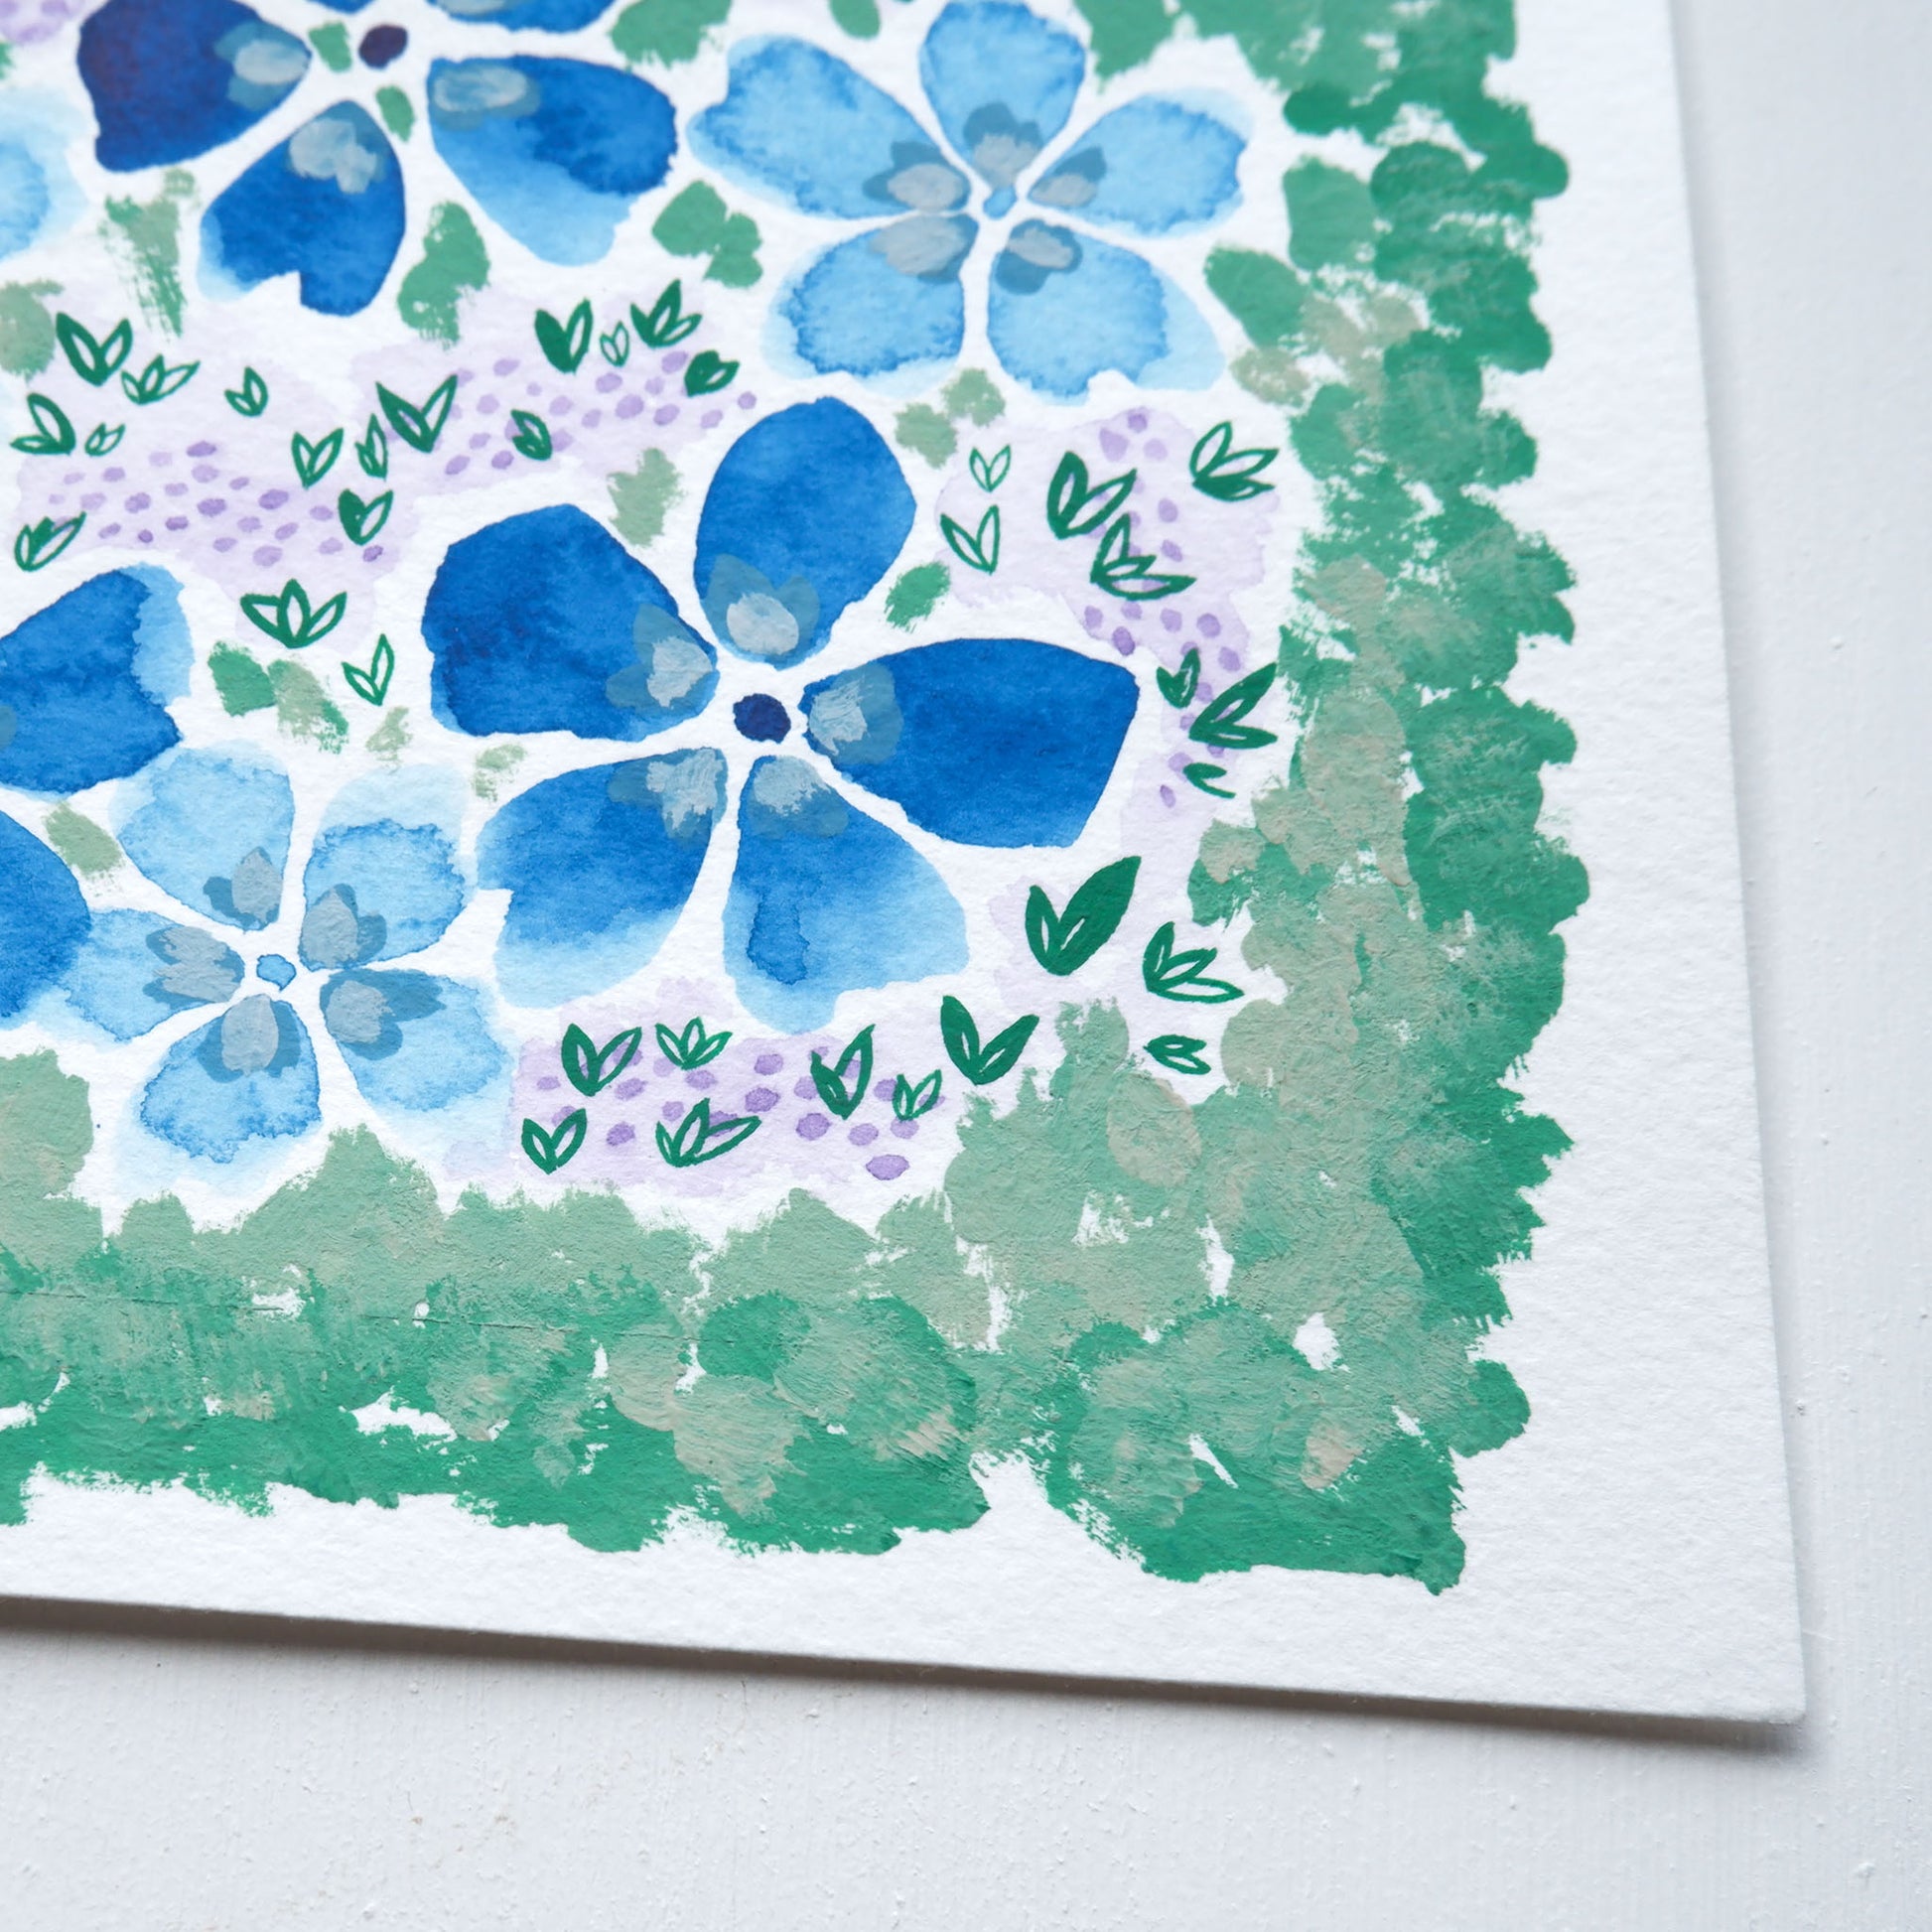 Detail of watercolour textured paper of floral forever original watercolour painting by Vancouver artist Marissa Schiesser